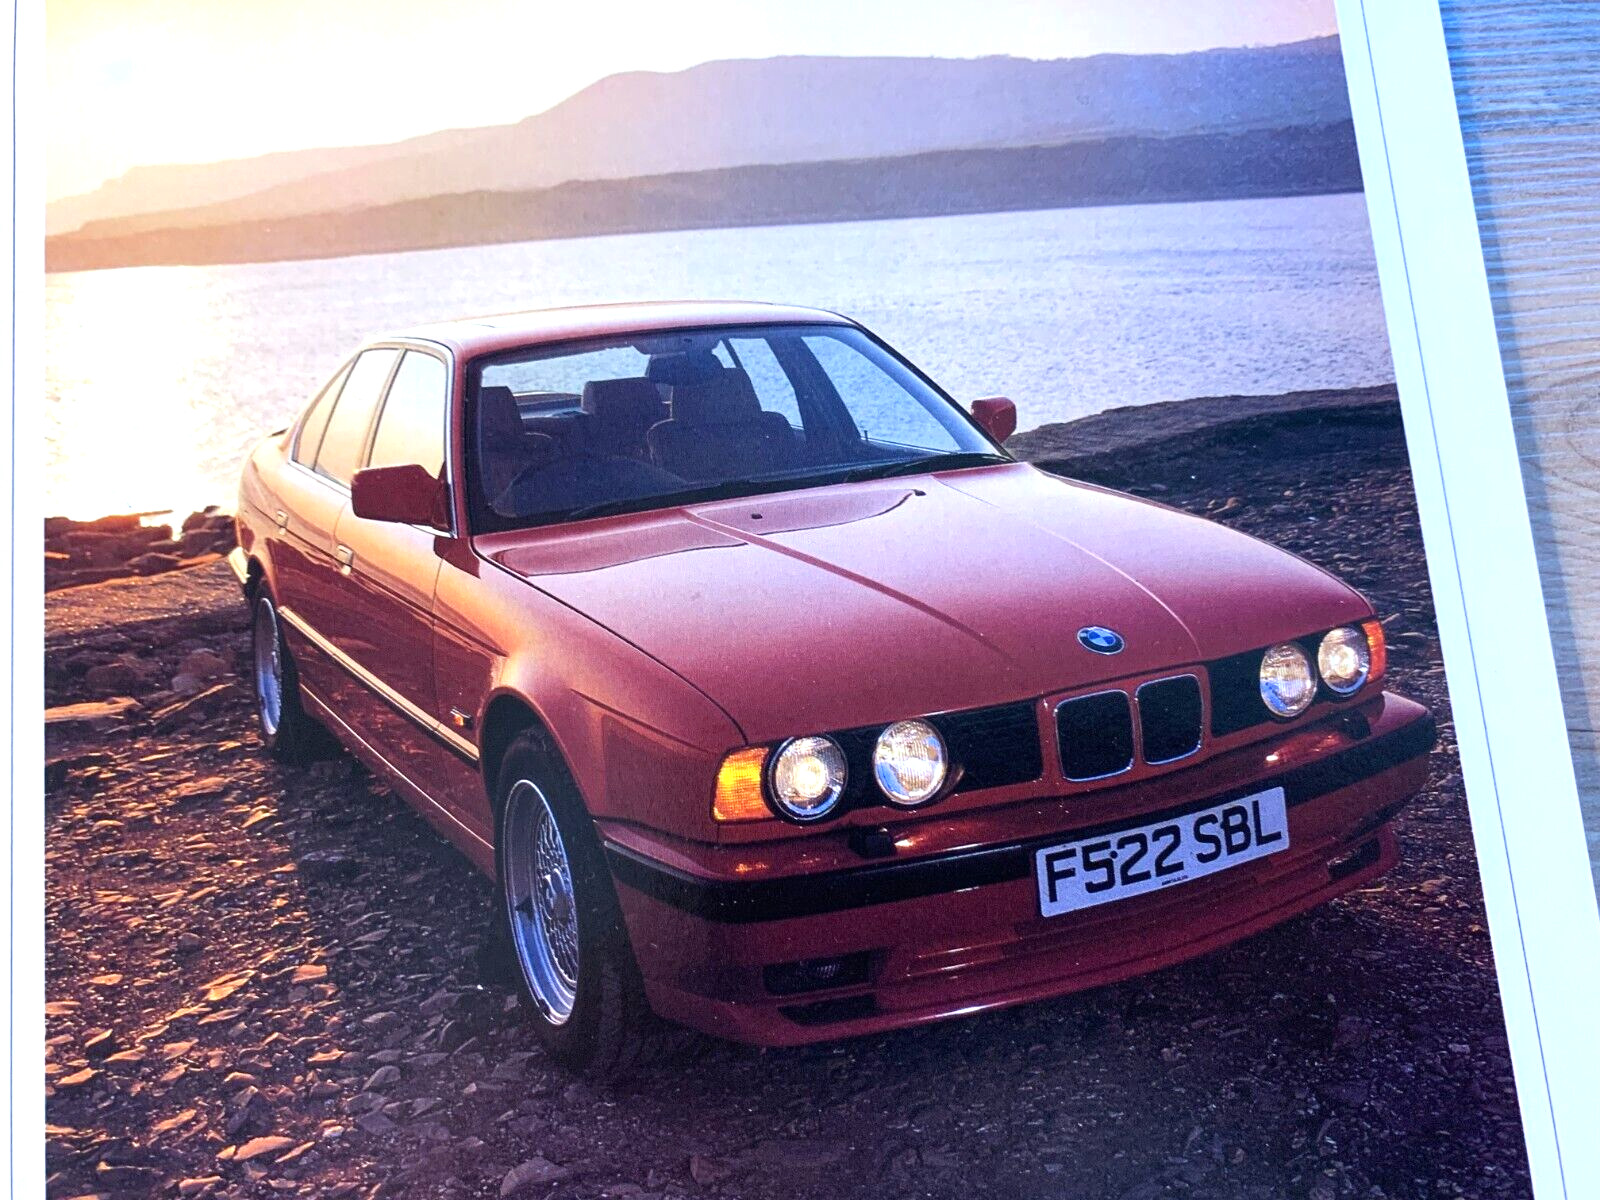 BMW E34 535i SPORT FRAMEABLE WALL ART IMAGE from CAR MAGAZINE TEST REVIEW